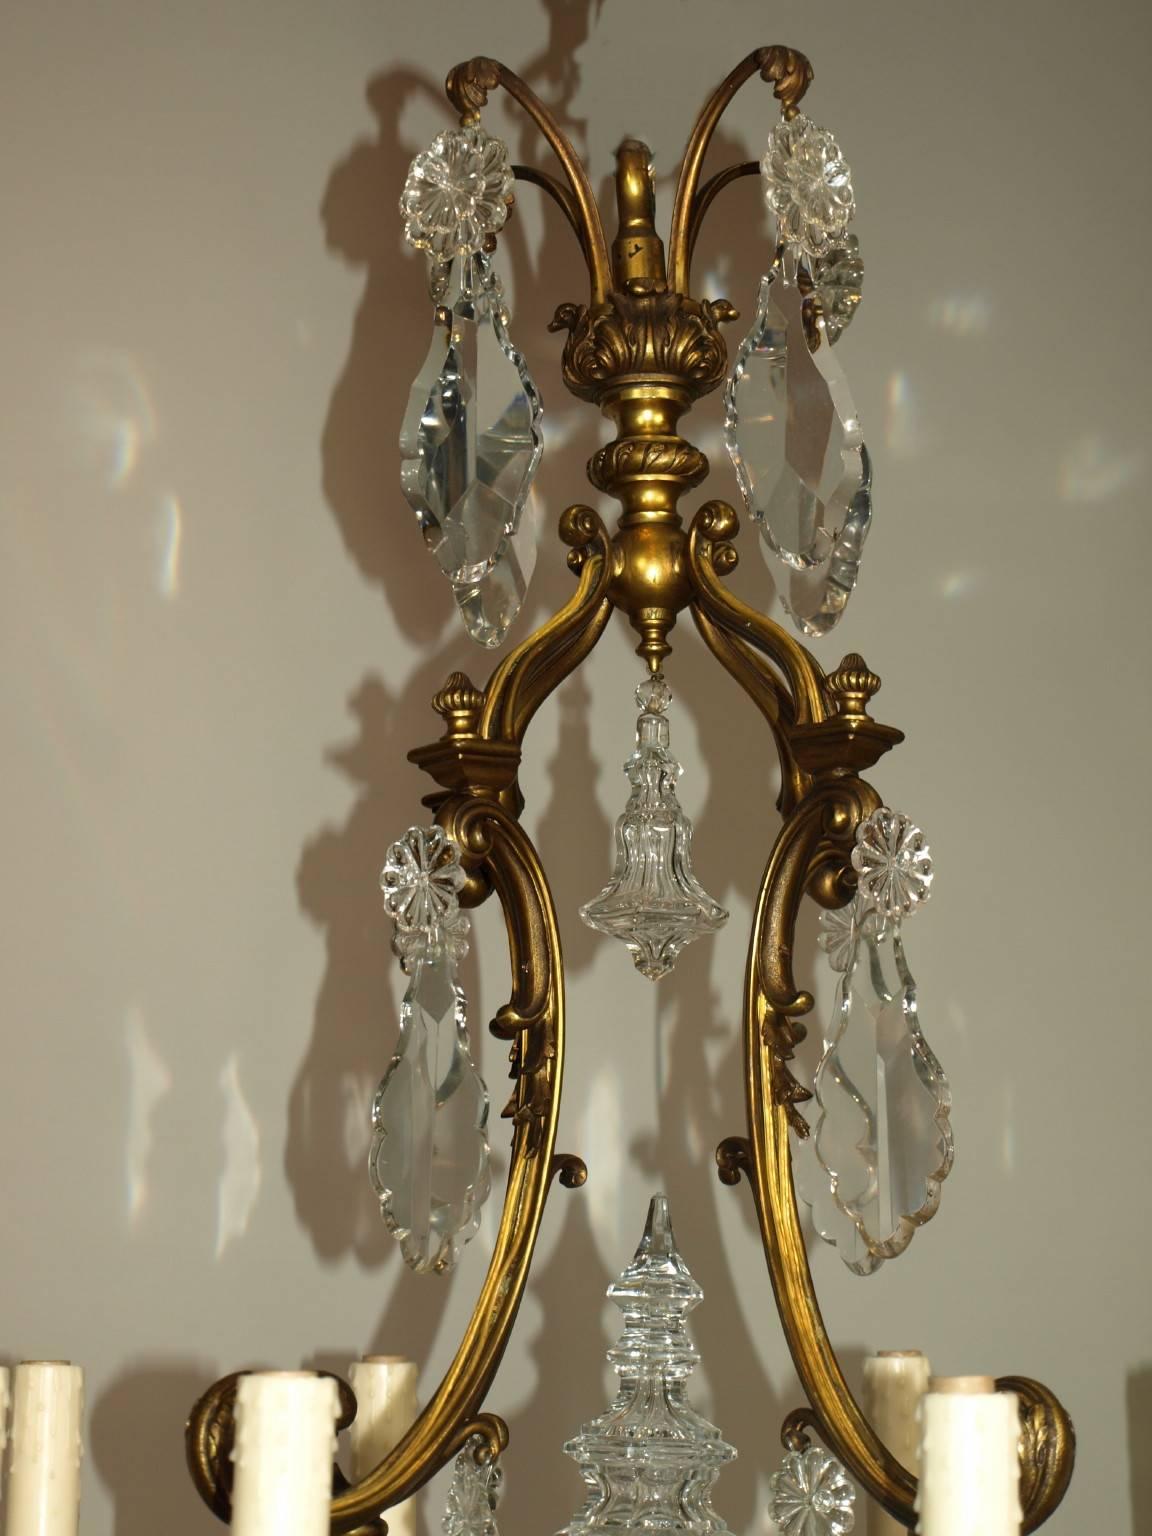 Elegant gilt bronze and crystal chandelier featuring hand-cut crystal pendalogues, eight lights.